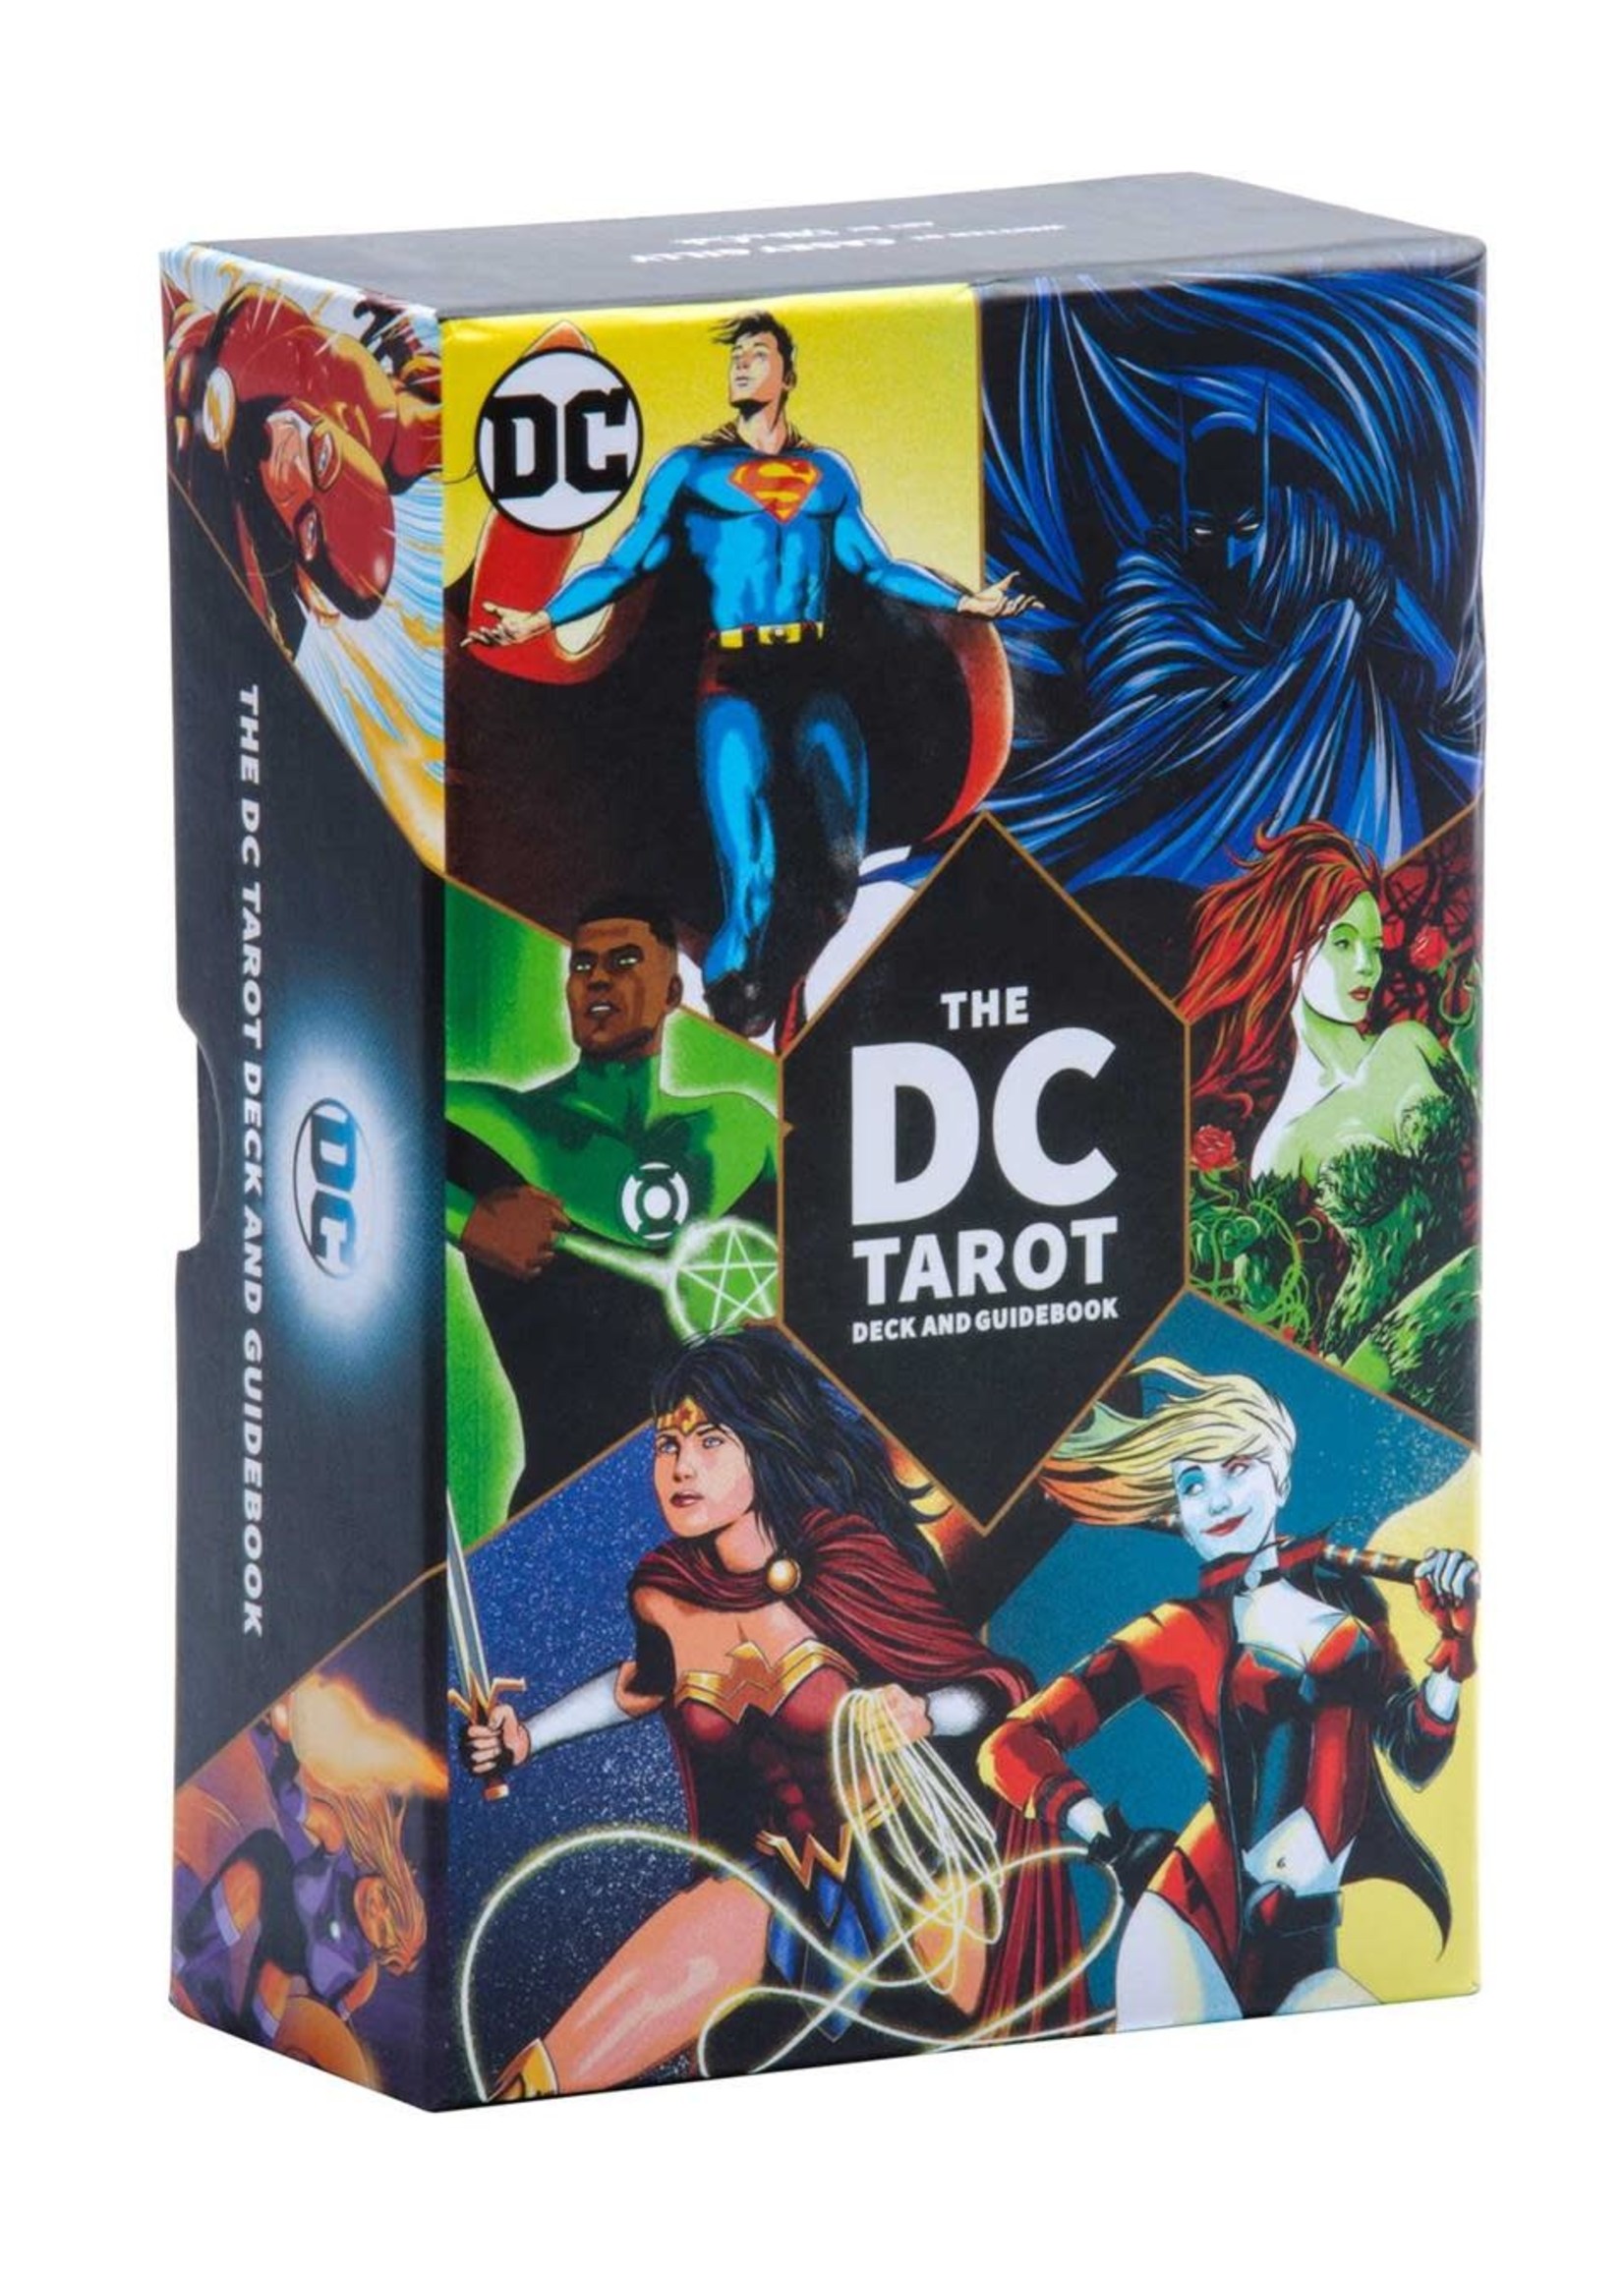 The DC Tarot Deck and Guidebook by Casey Gilly, 17th & Oak